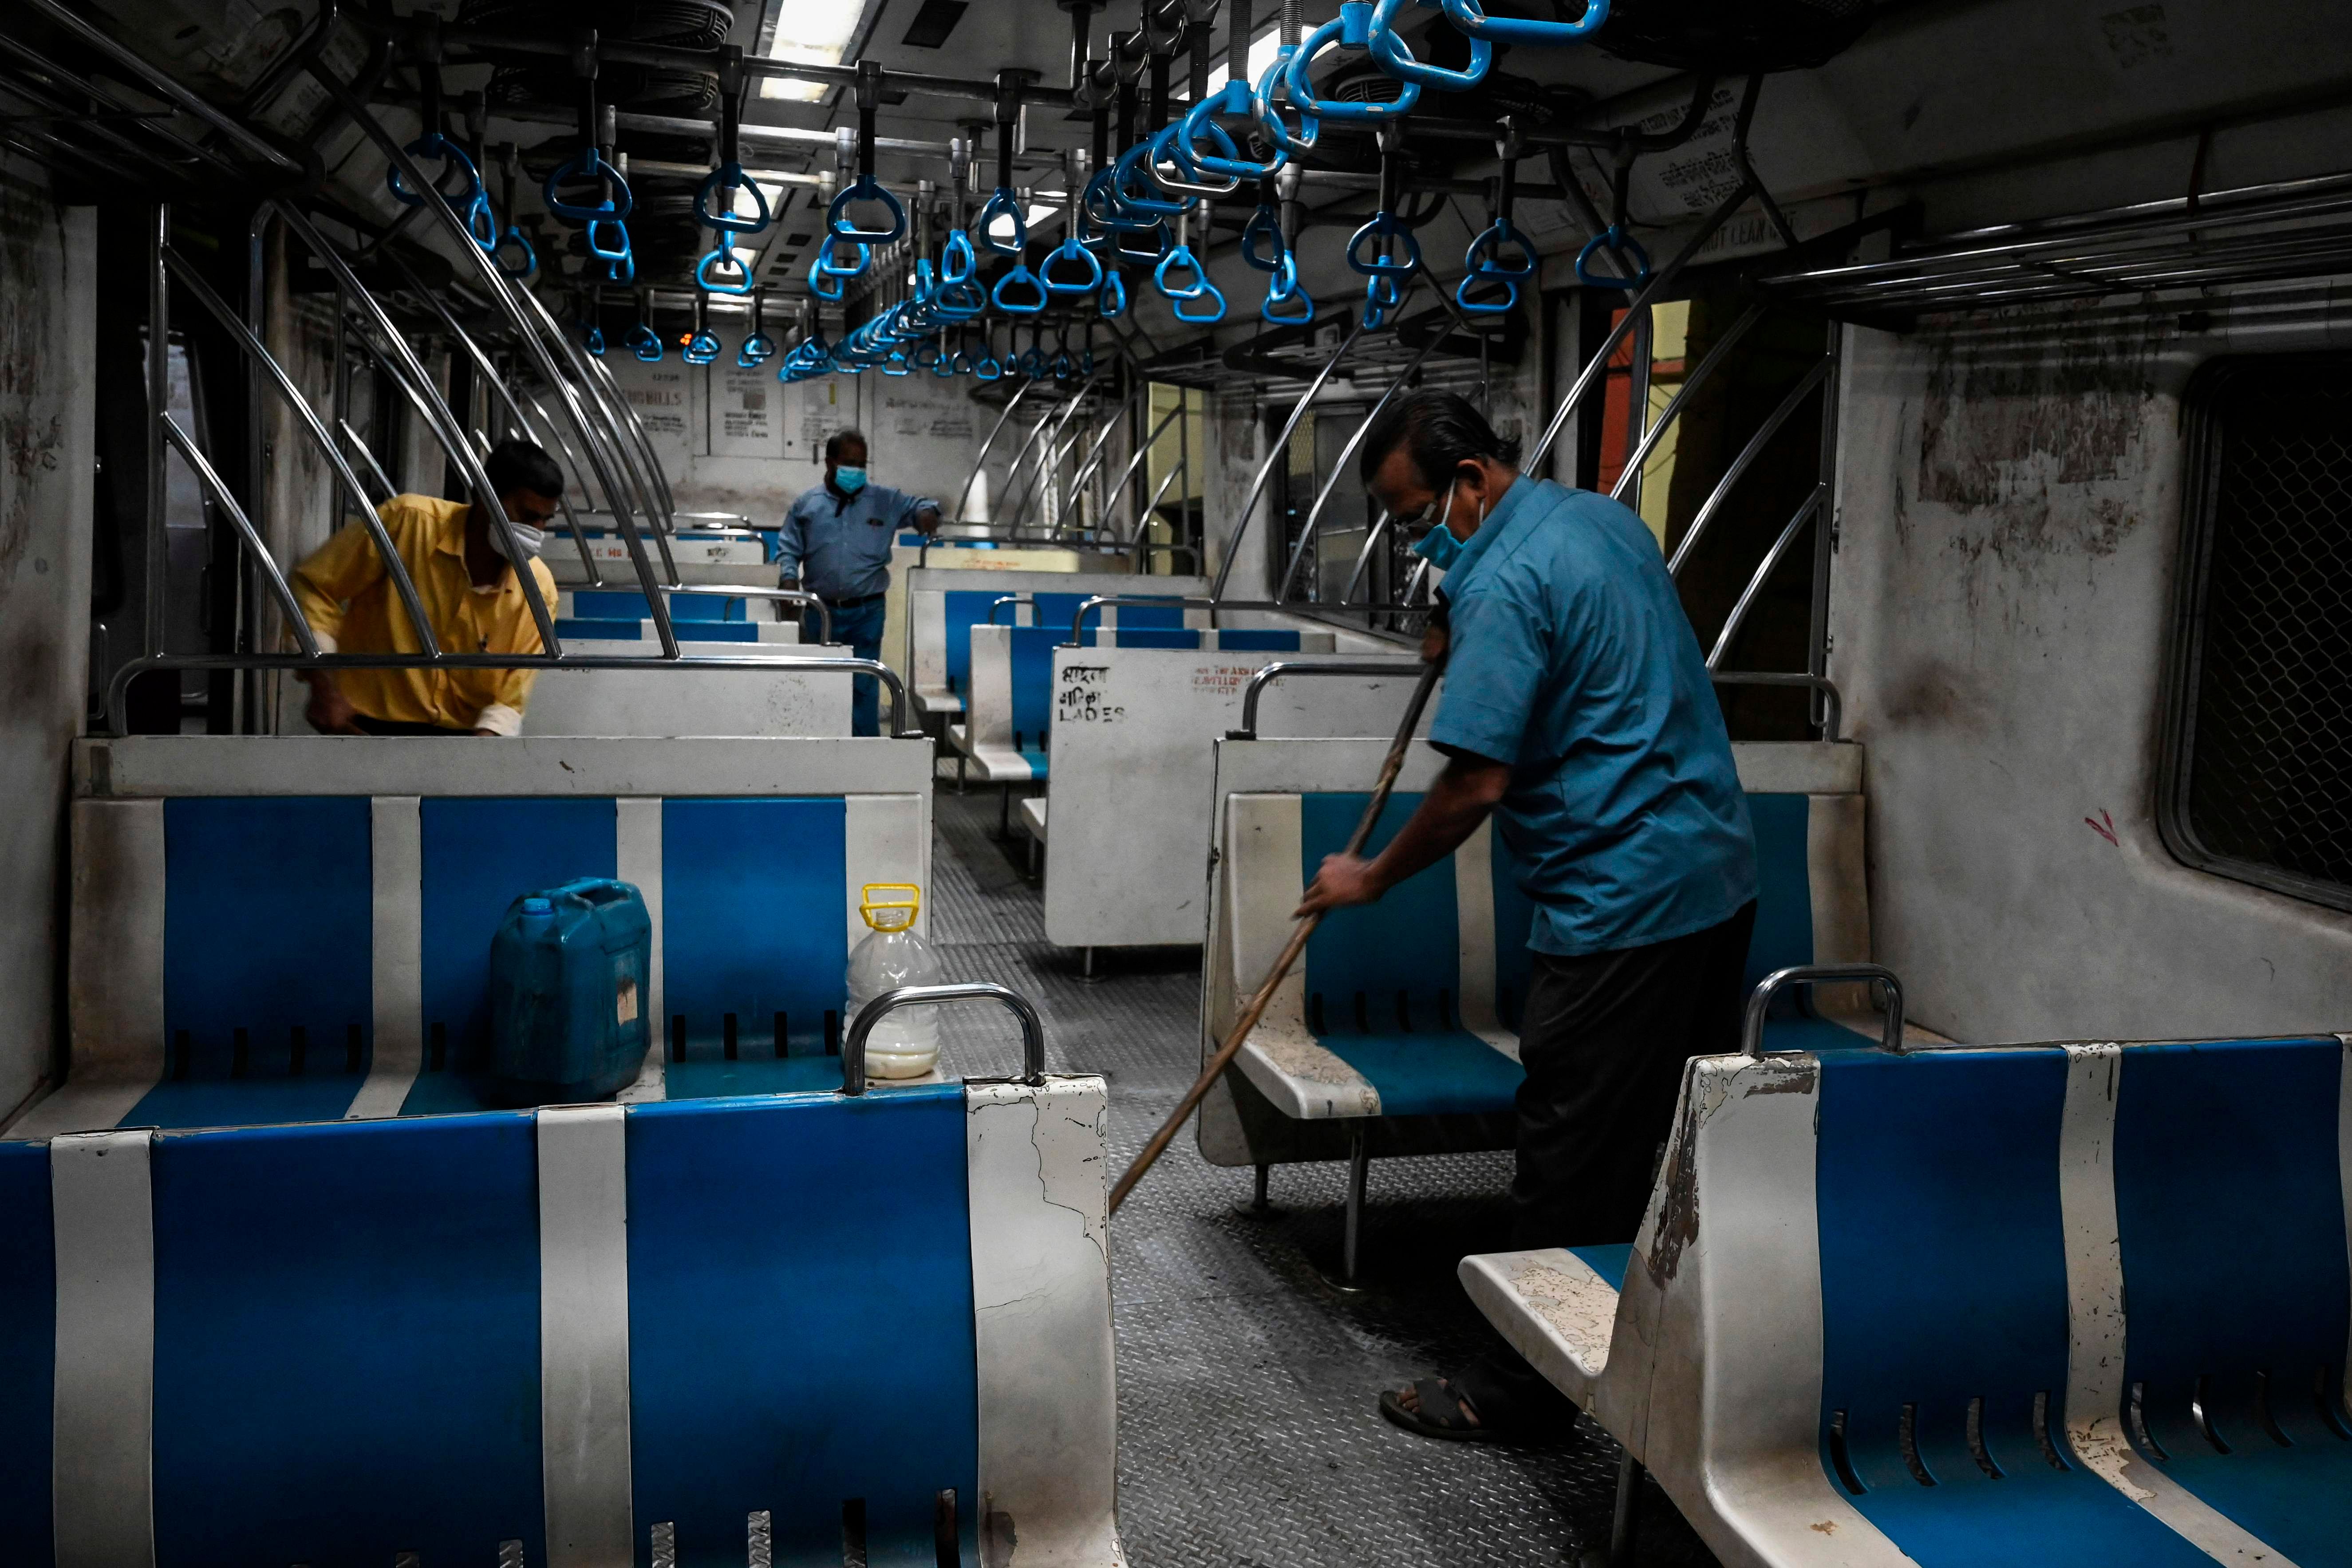 Indian Railways contract staff clean a train carriage at a train shed in Kolkata. Credits: AFP Photo